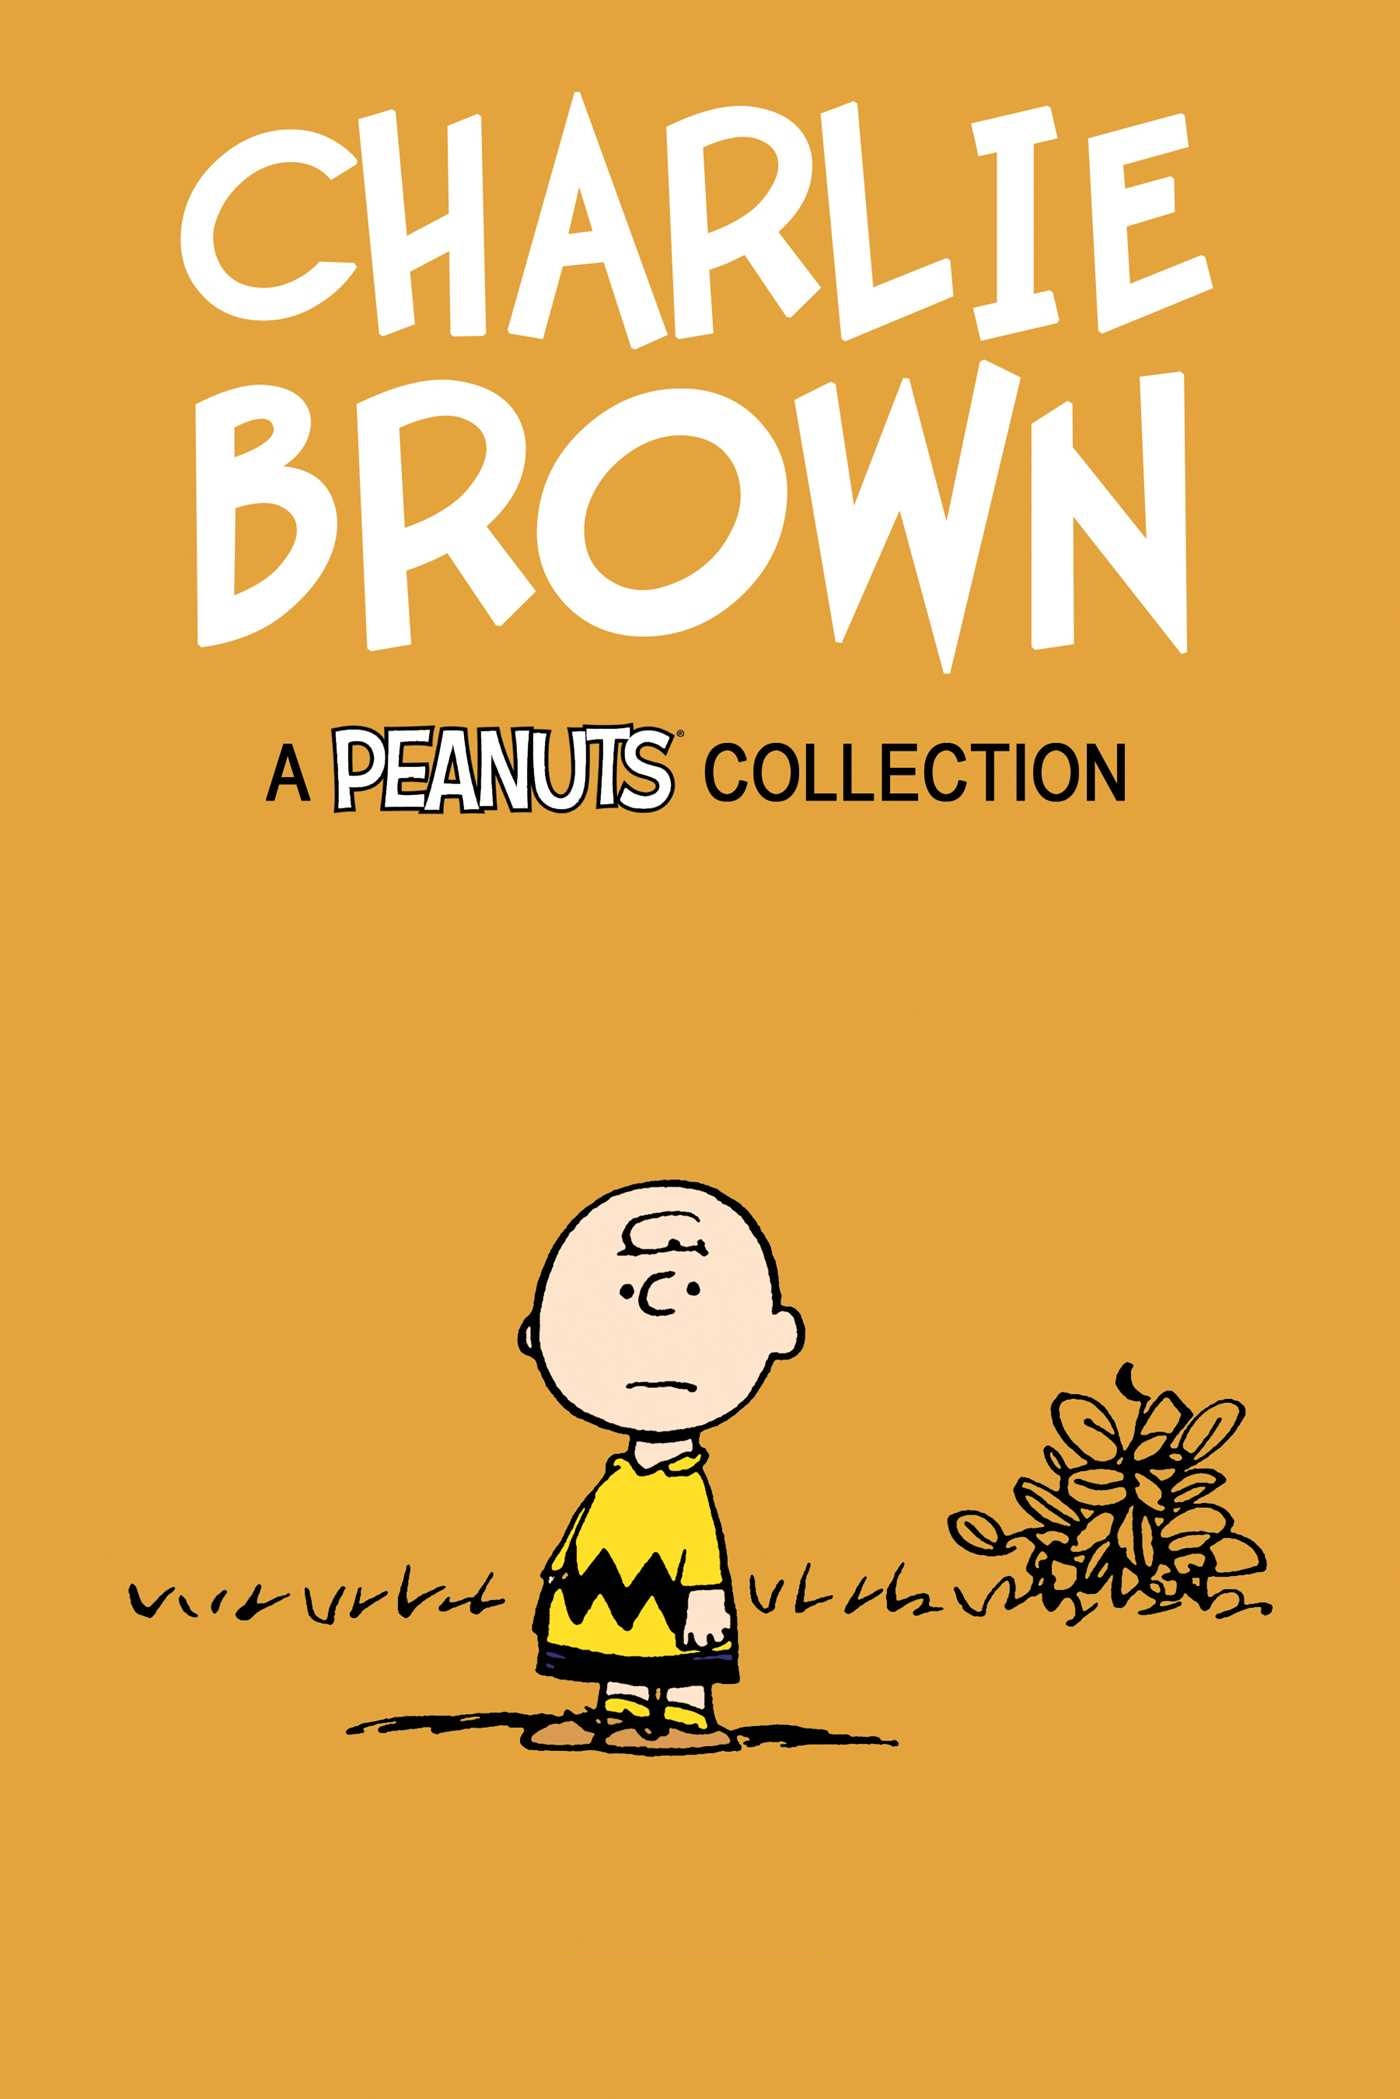 Charlie Brown Peanuts Collection Background